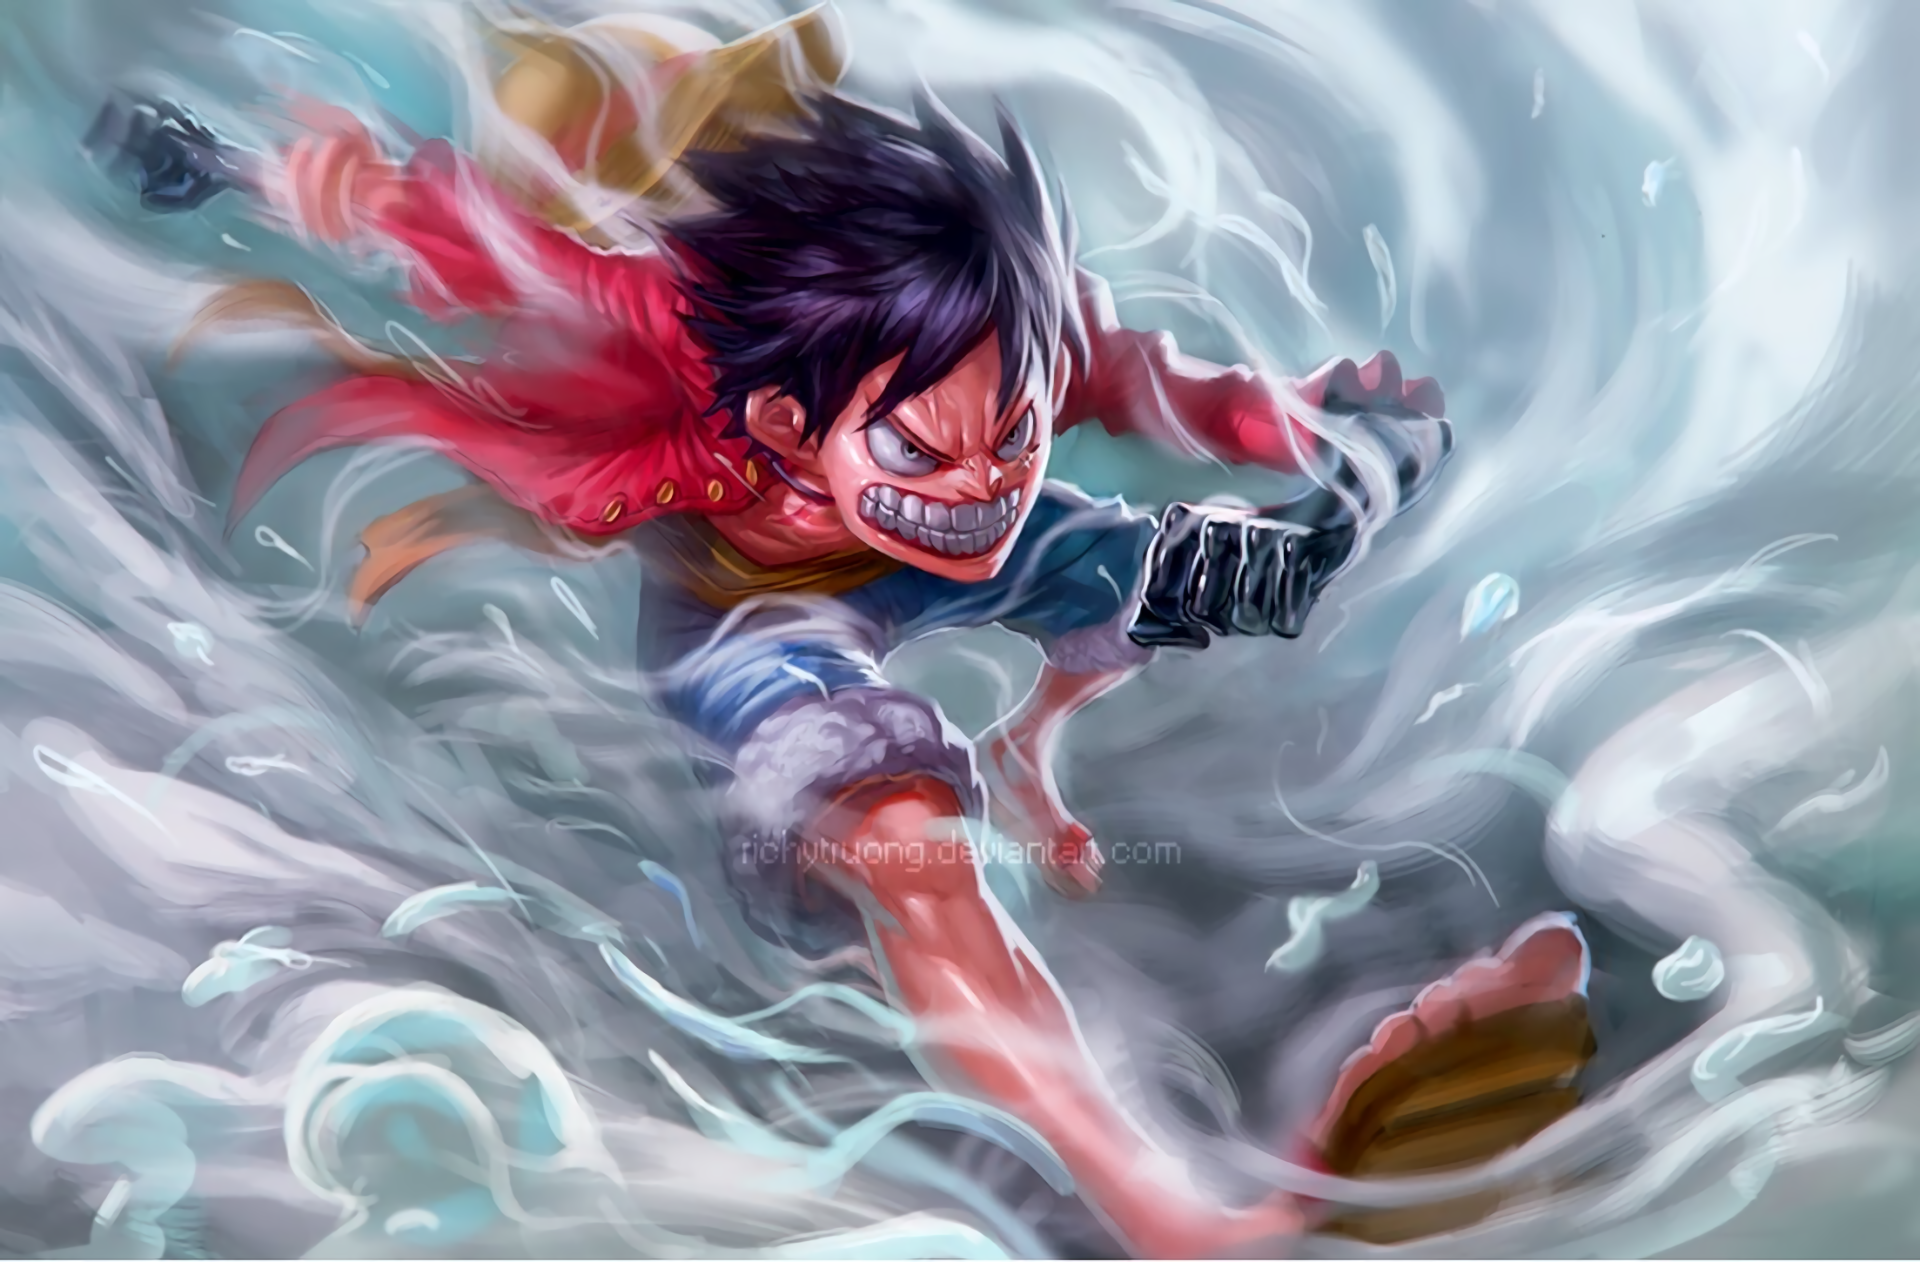 Anime One Piece 4k Ultra HD Wallpaper by r-trigger